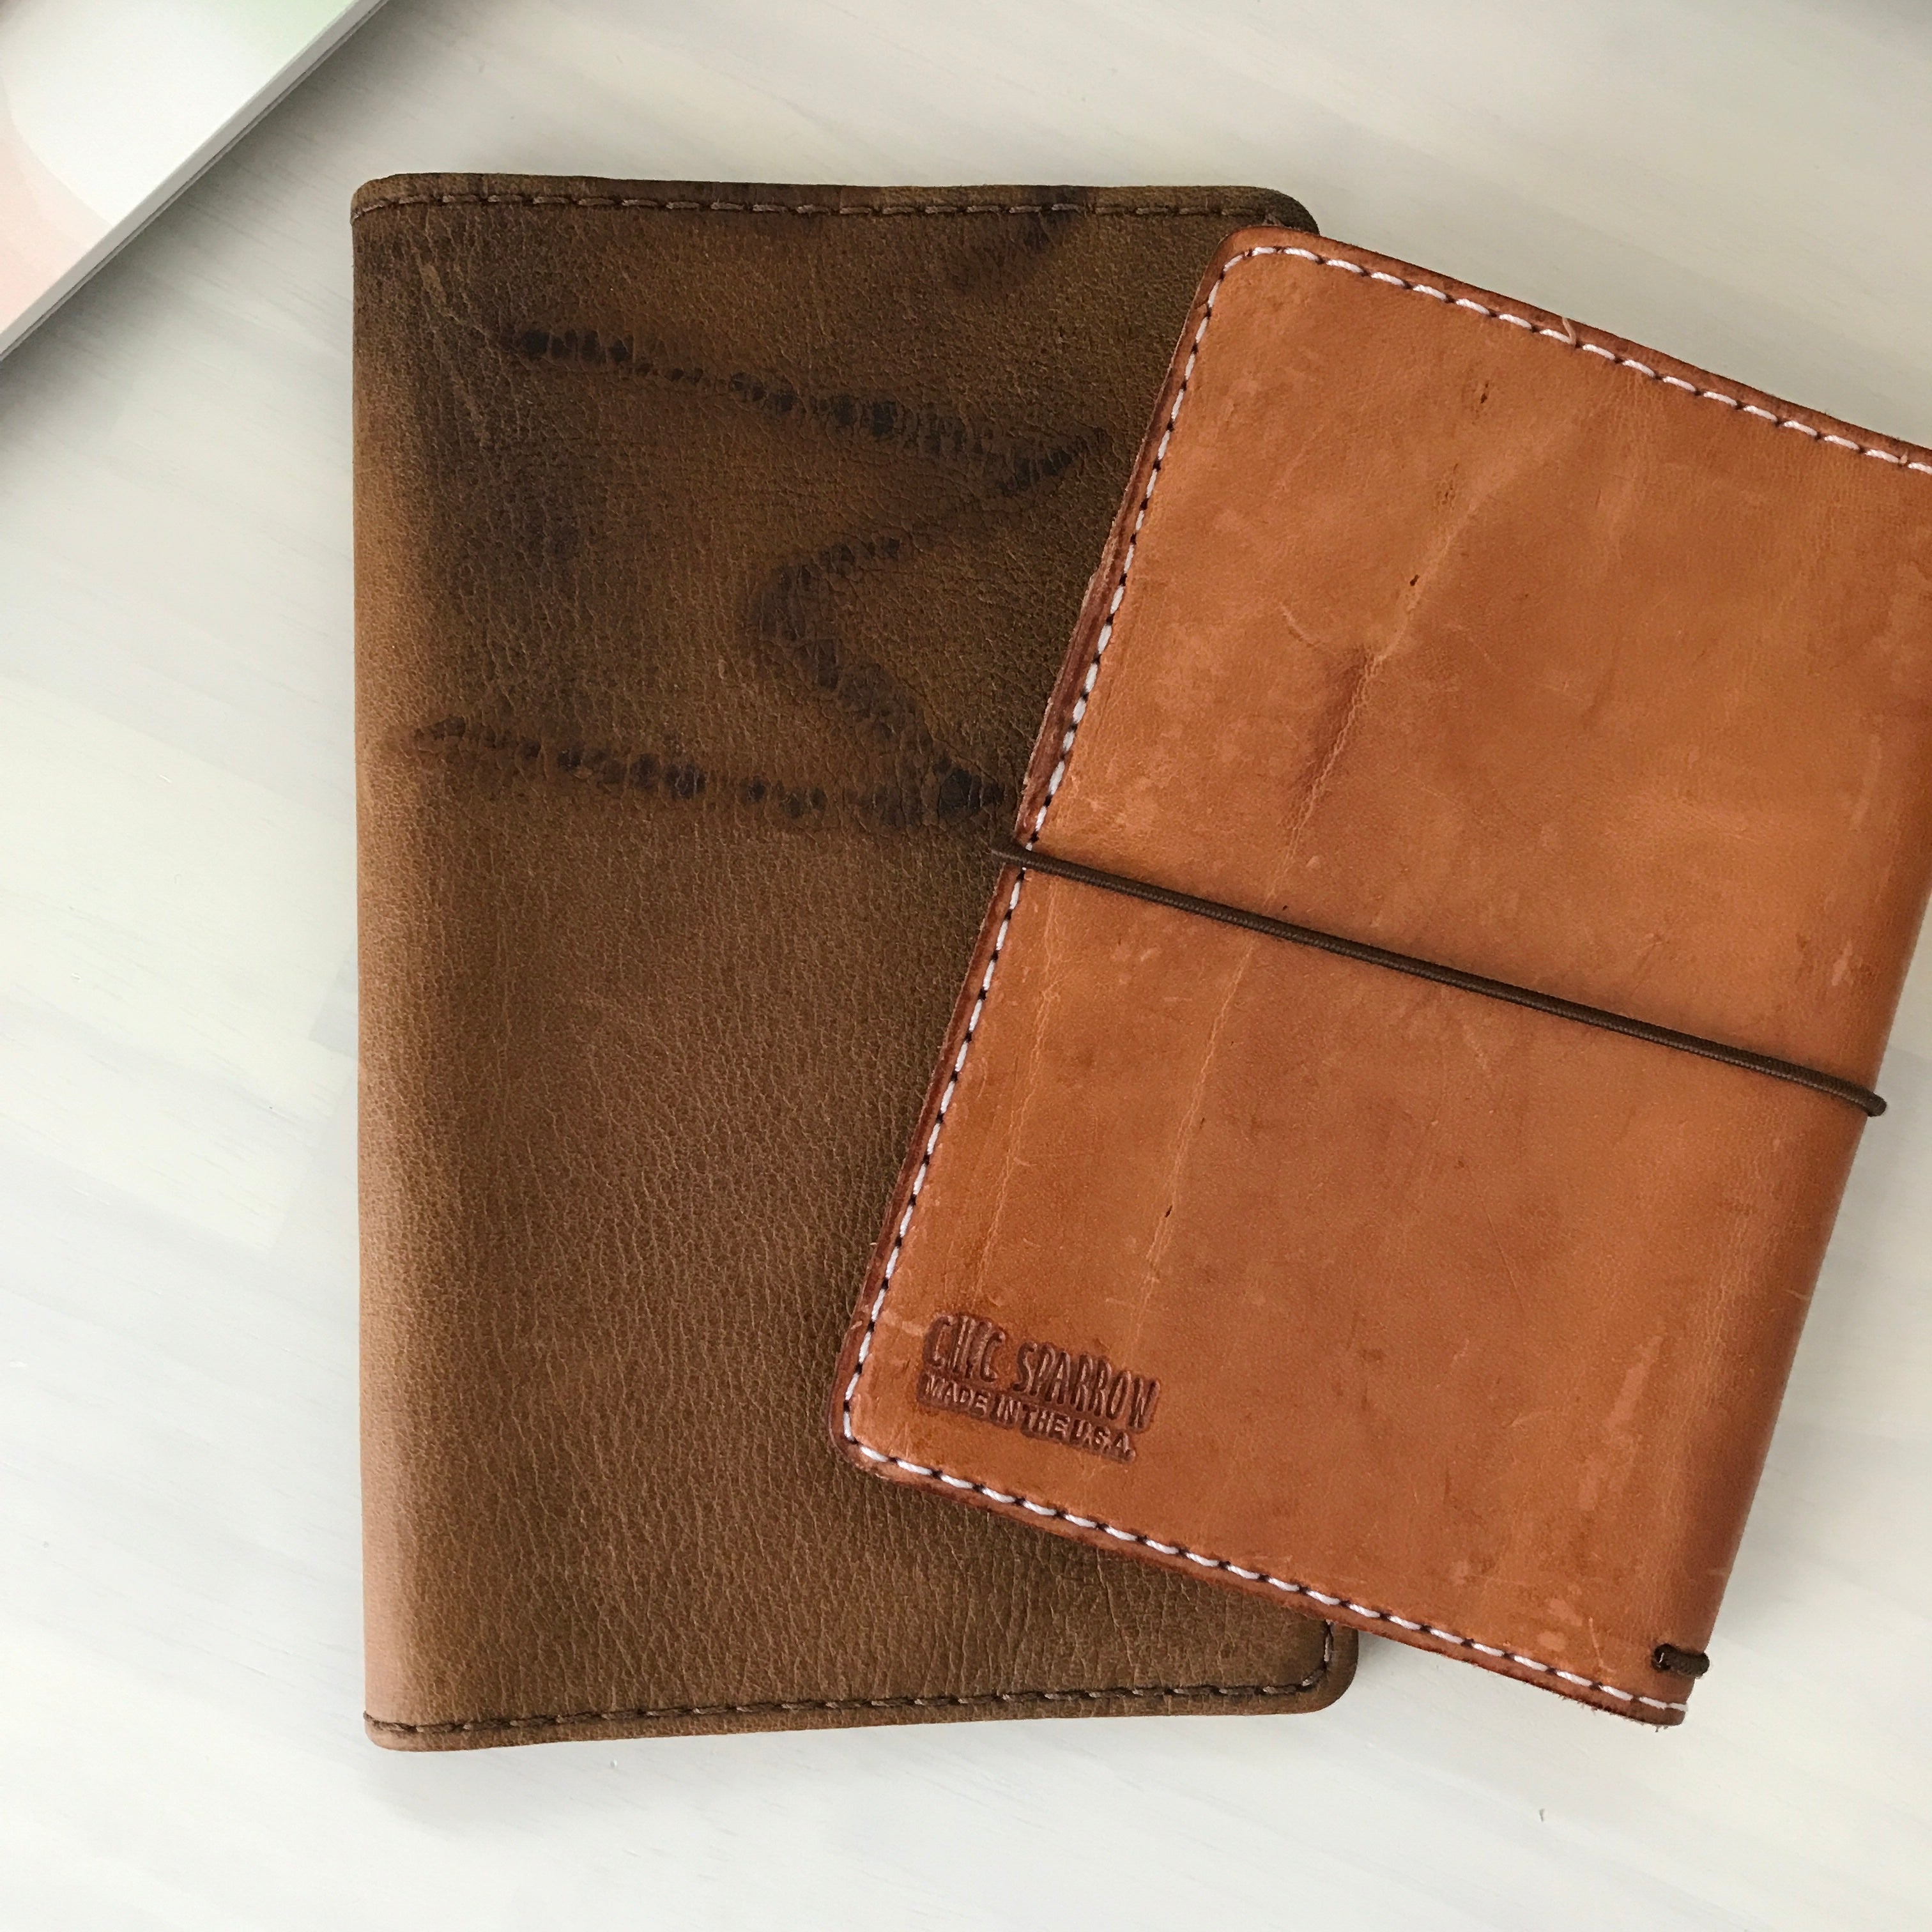 Branded Leather Journal Covers